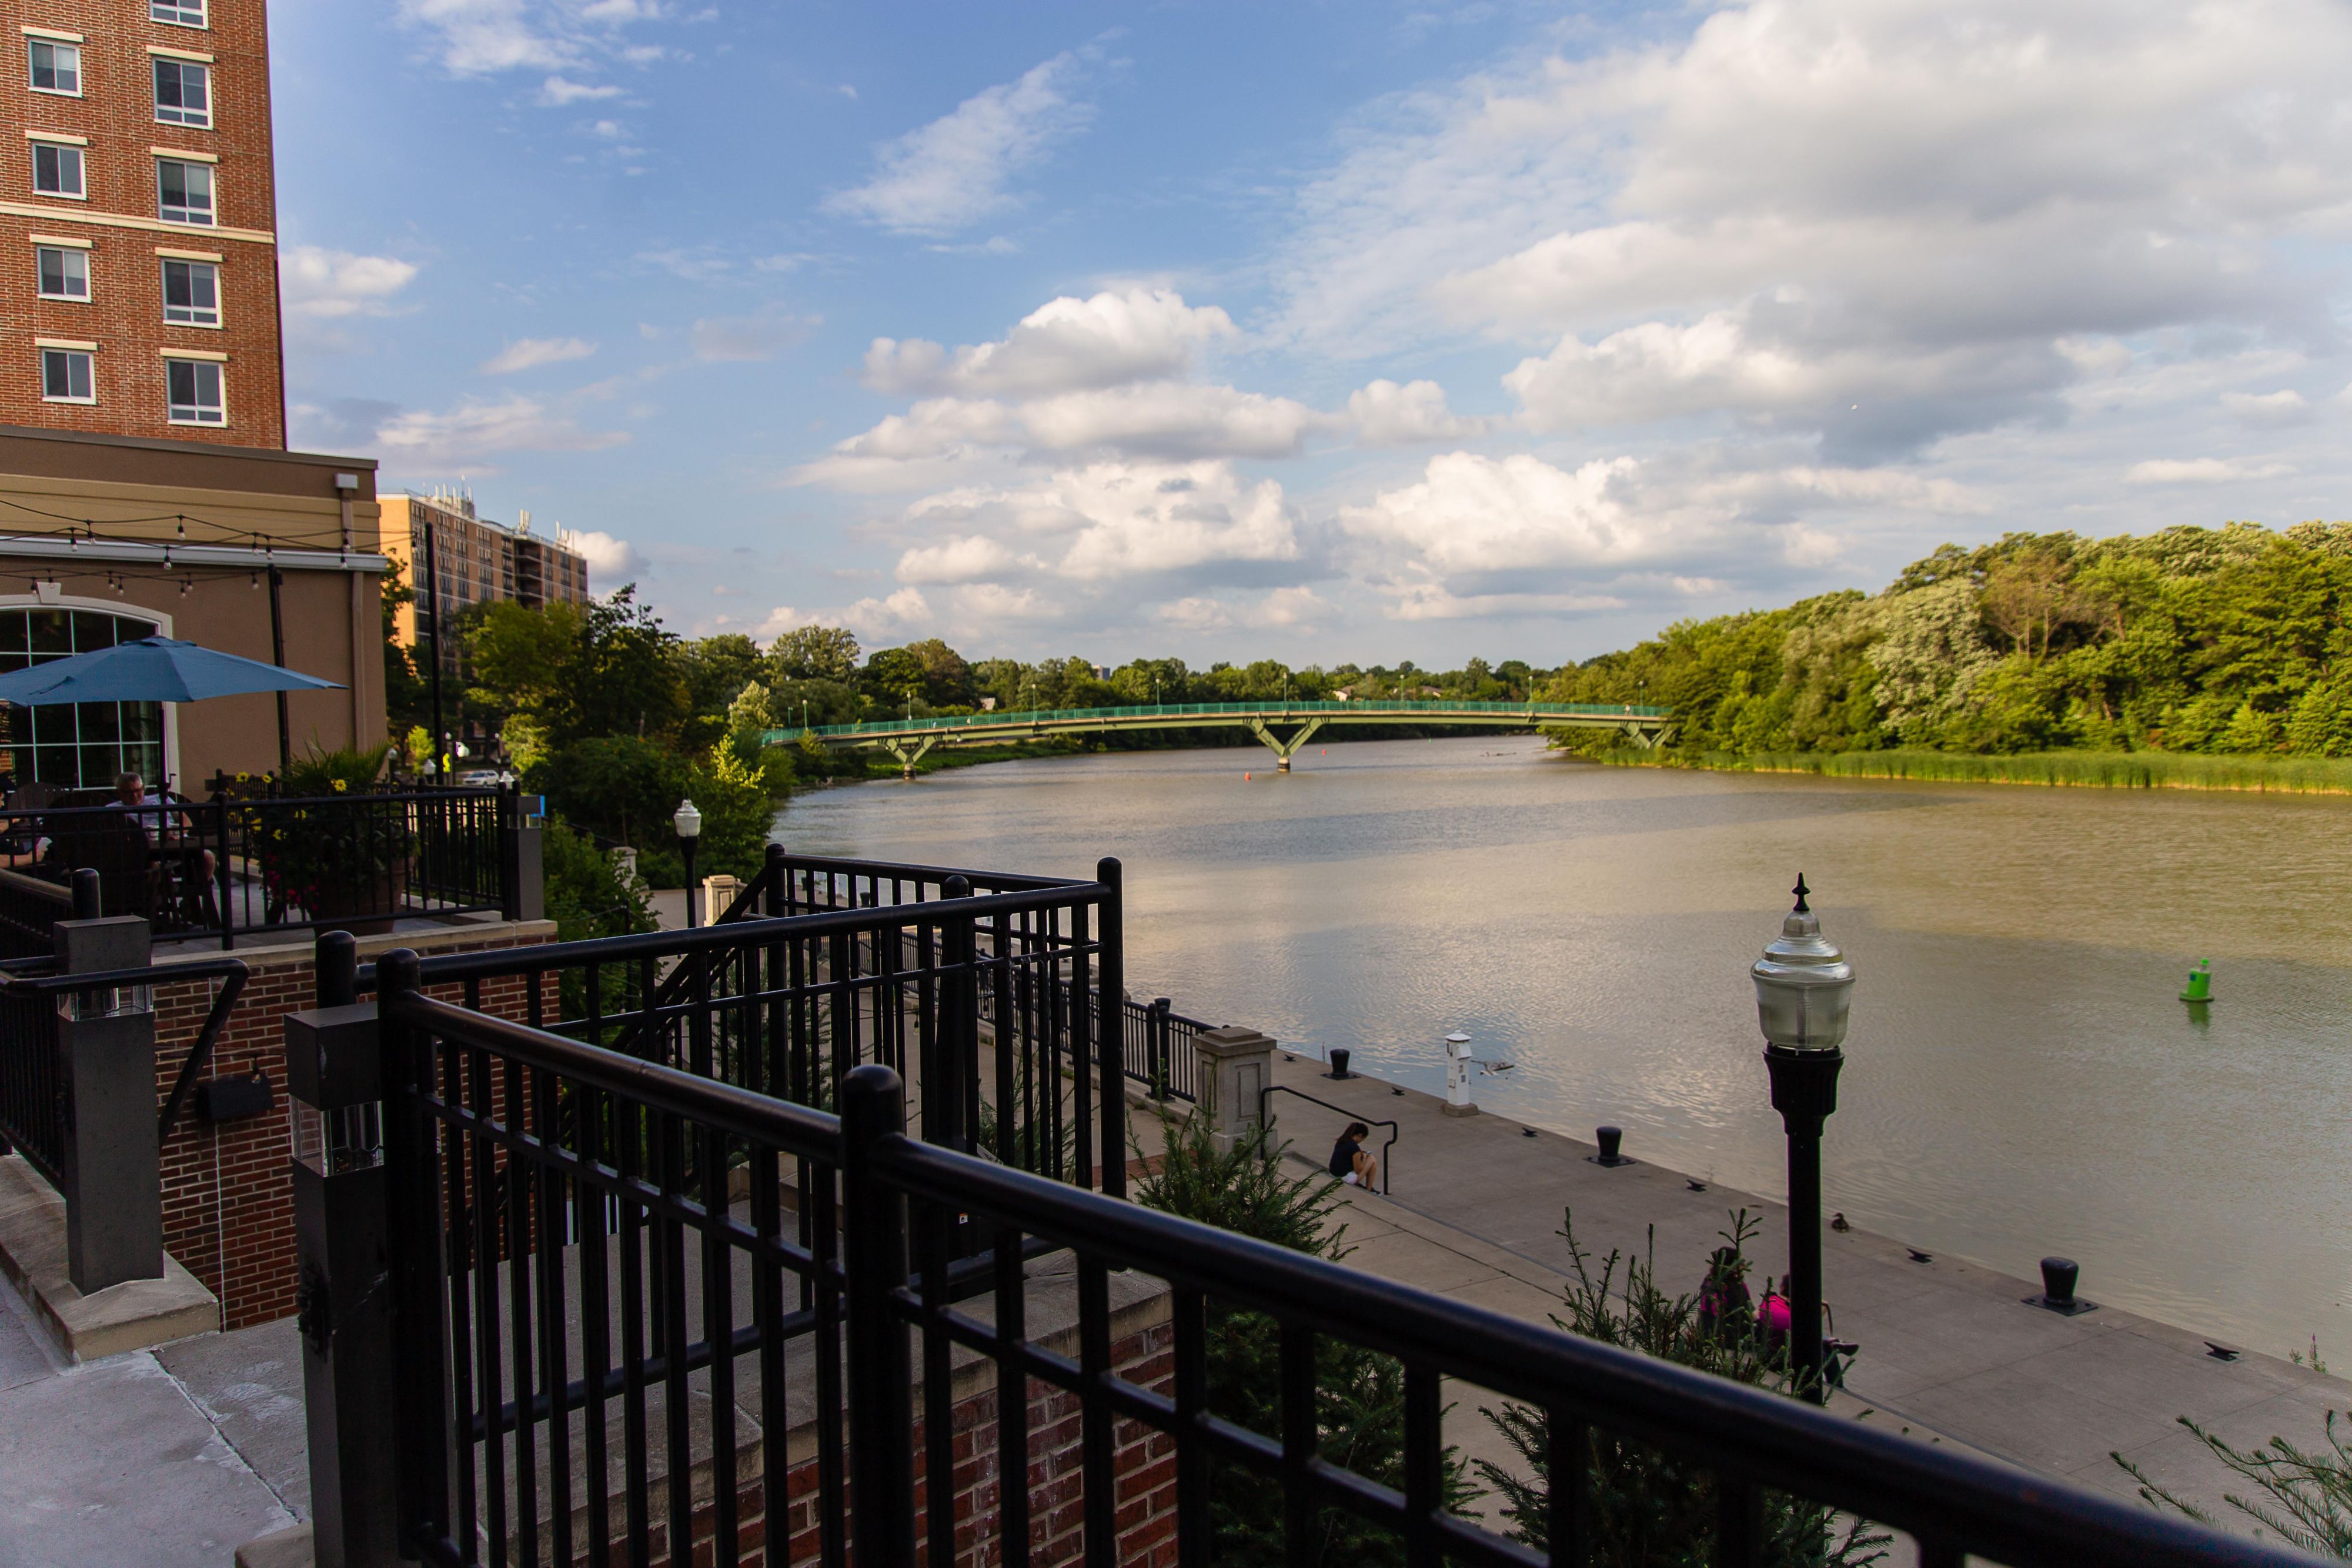  The convenient walk bridge over the Genesee River connects the hotel to the campus allowing our U of R families to take in the beautiful campus year-round.